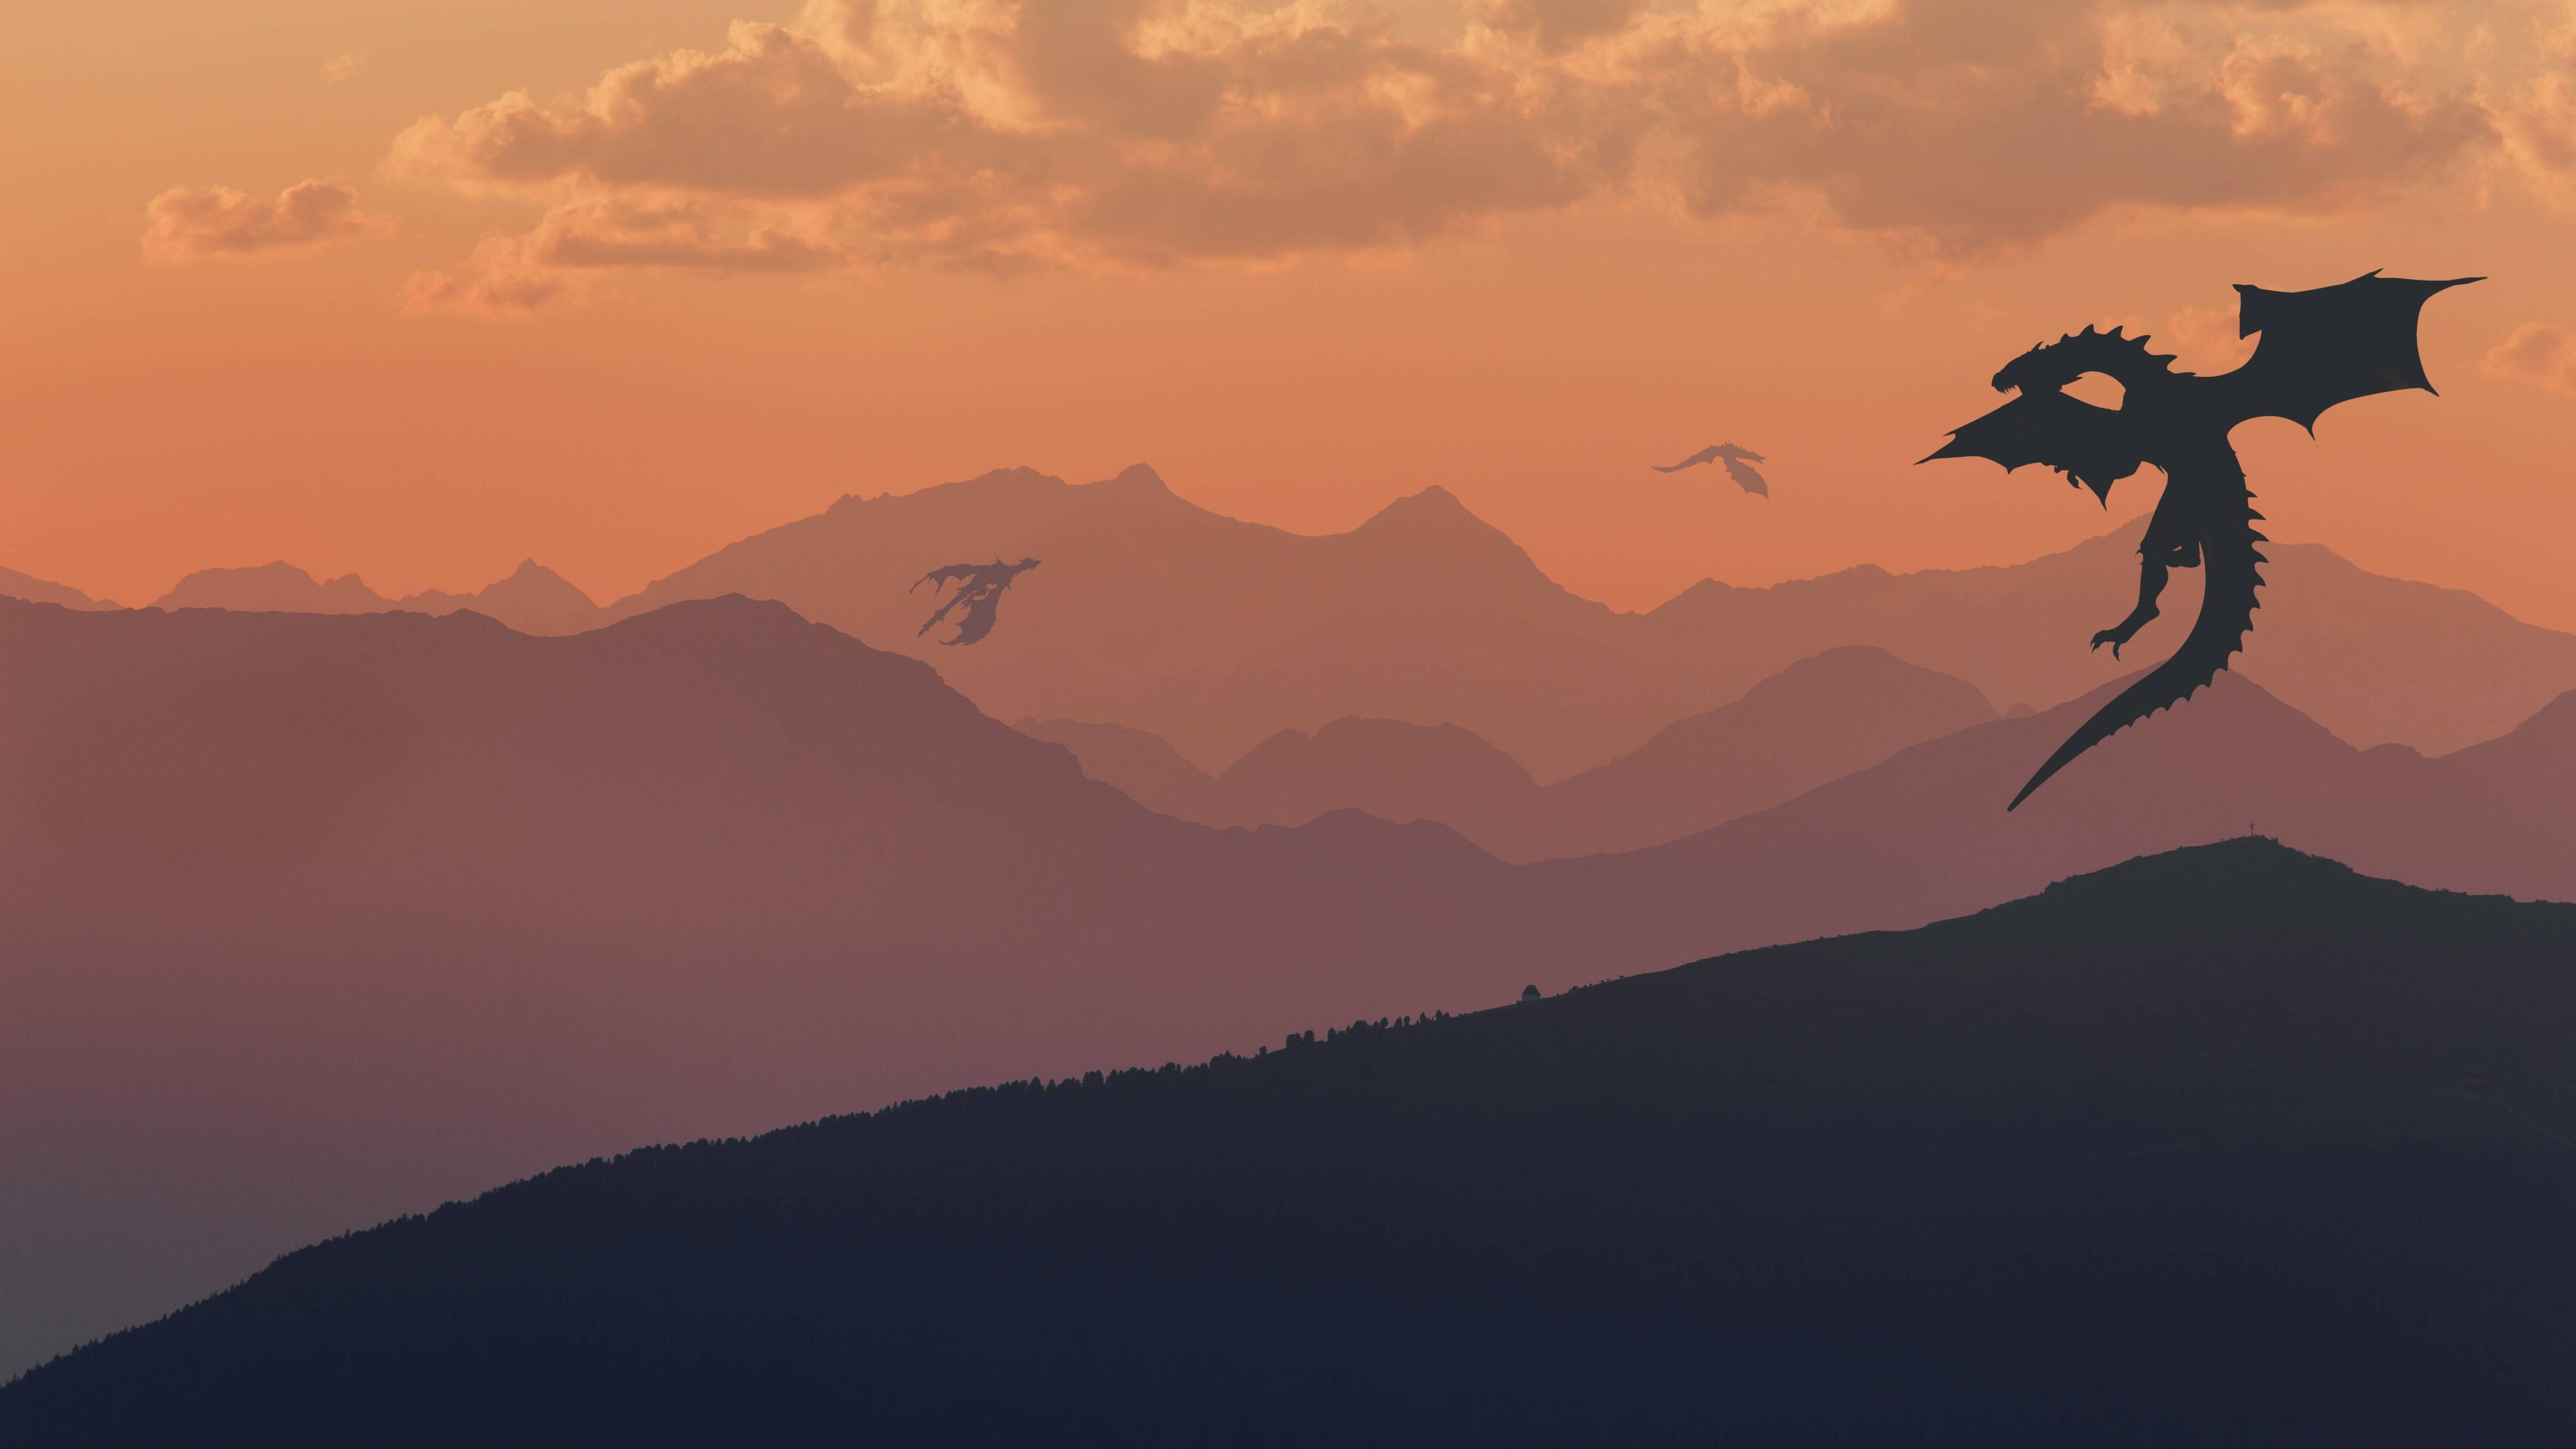 A dragon flying over the mountains at sunset - Dragon